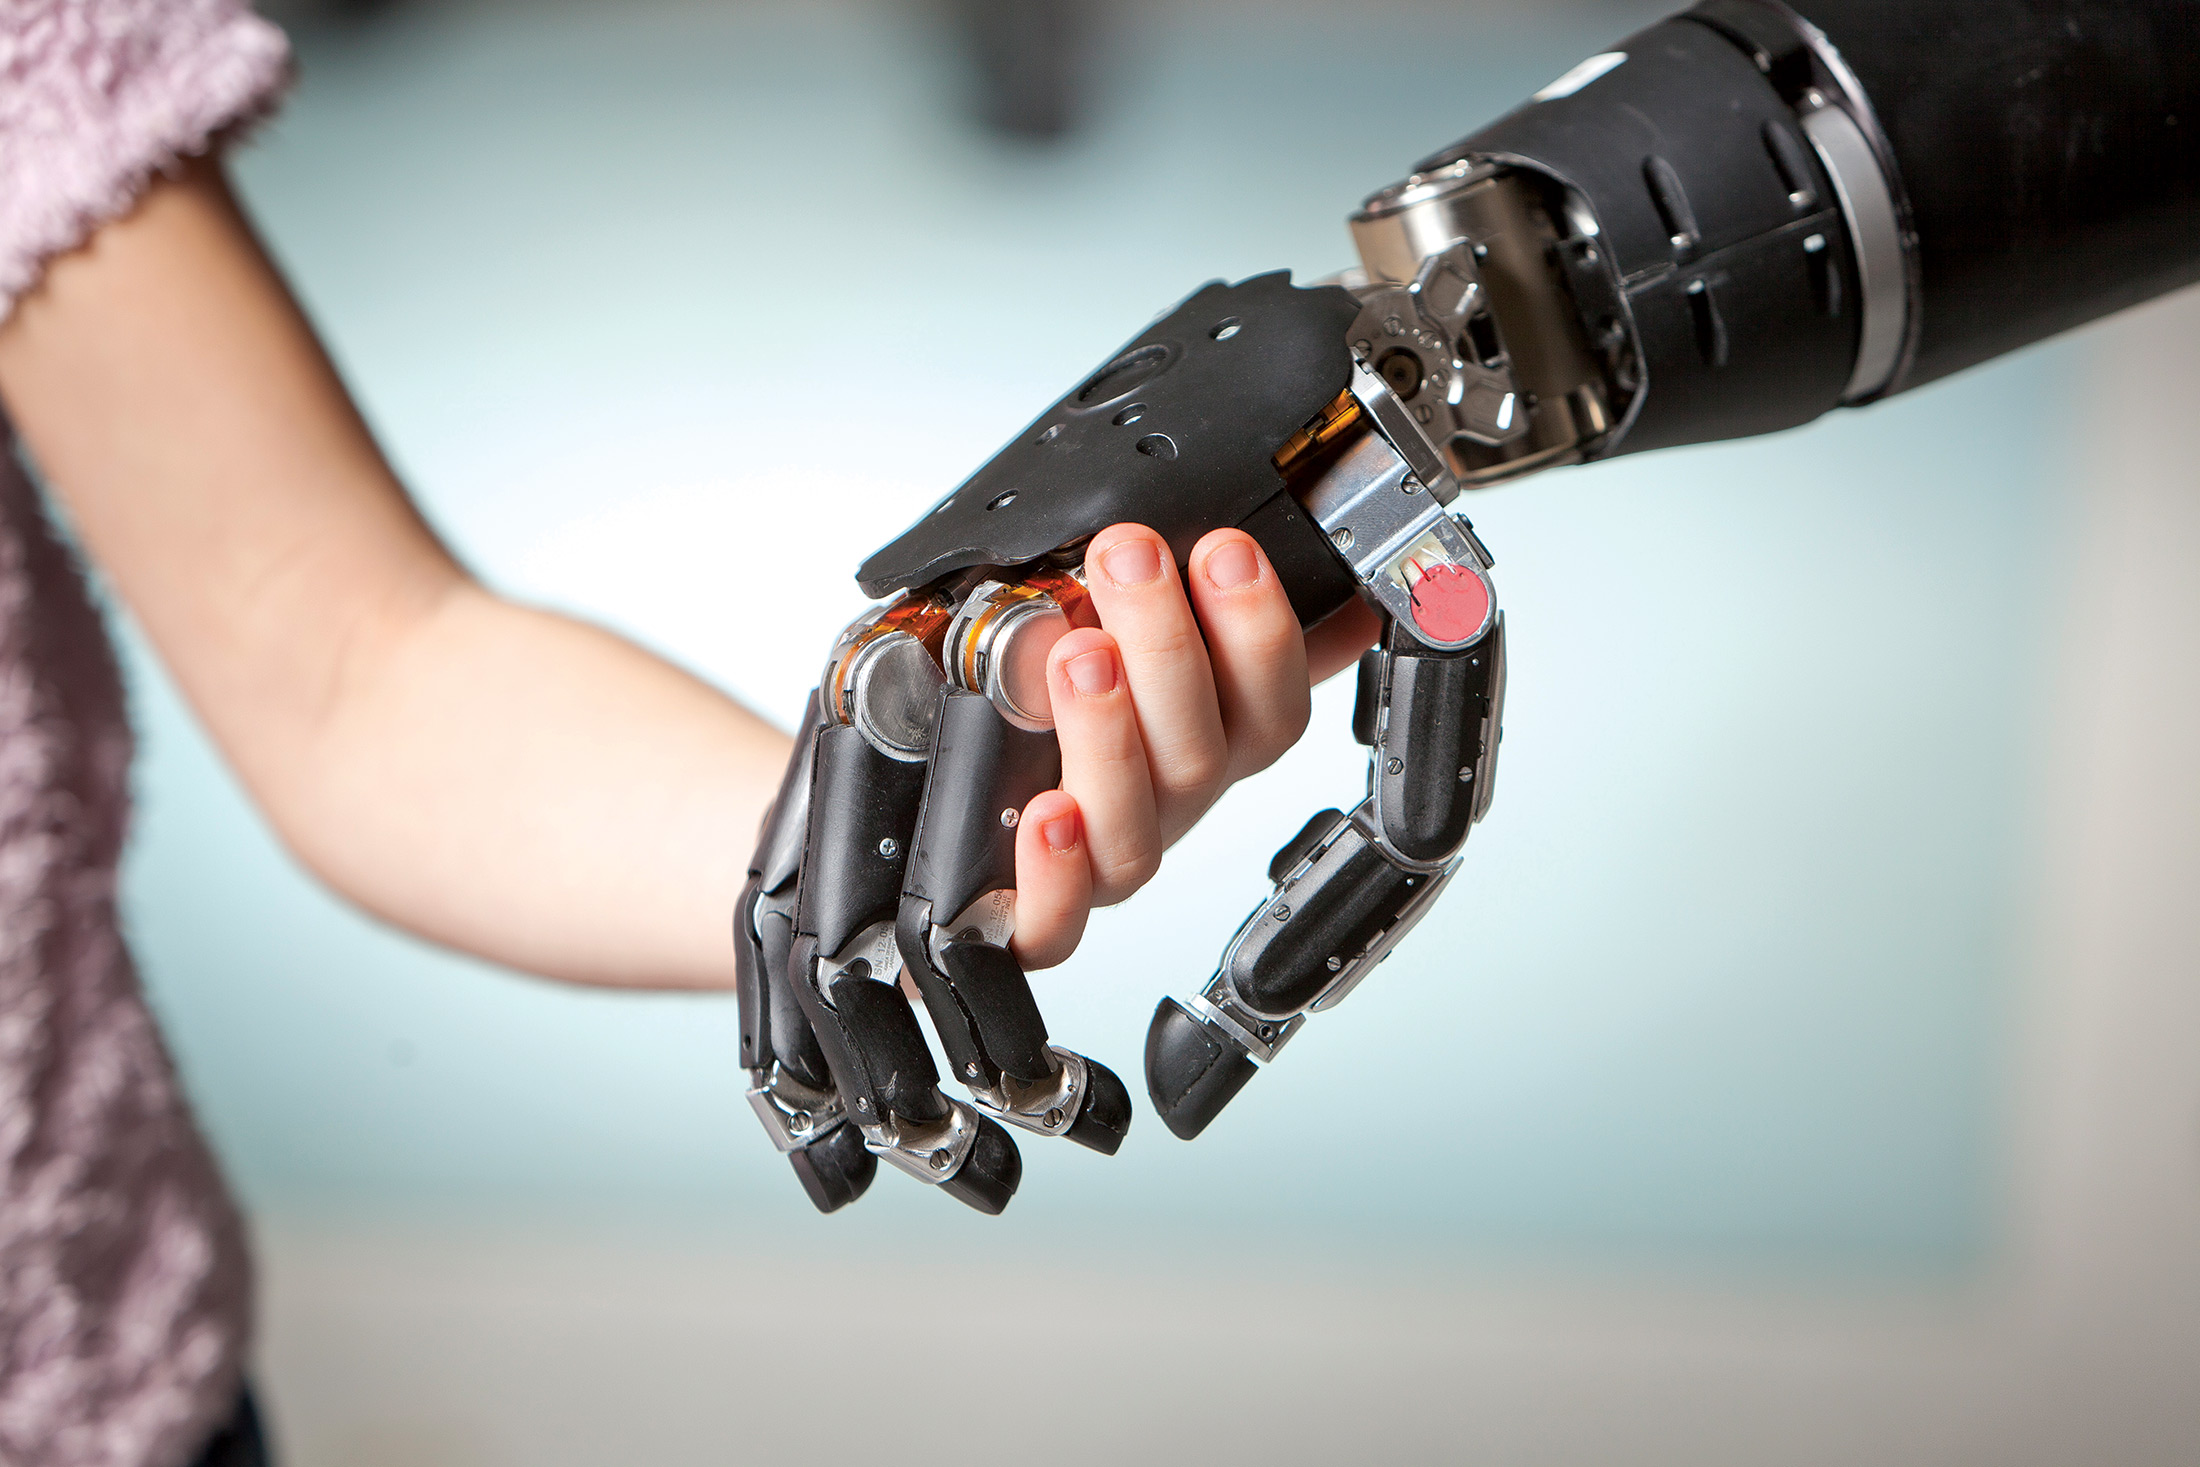 Pin by DON Young on Ref_Robotic arm | Prosthetics, Prosthetic arm